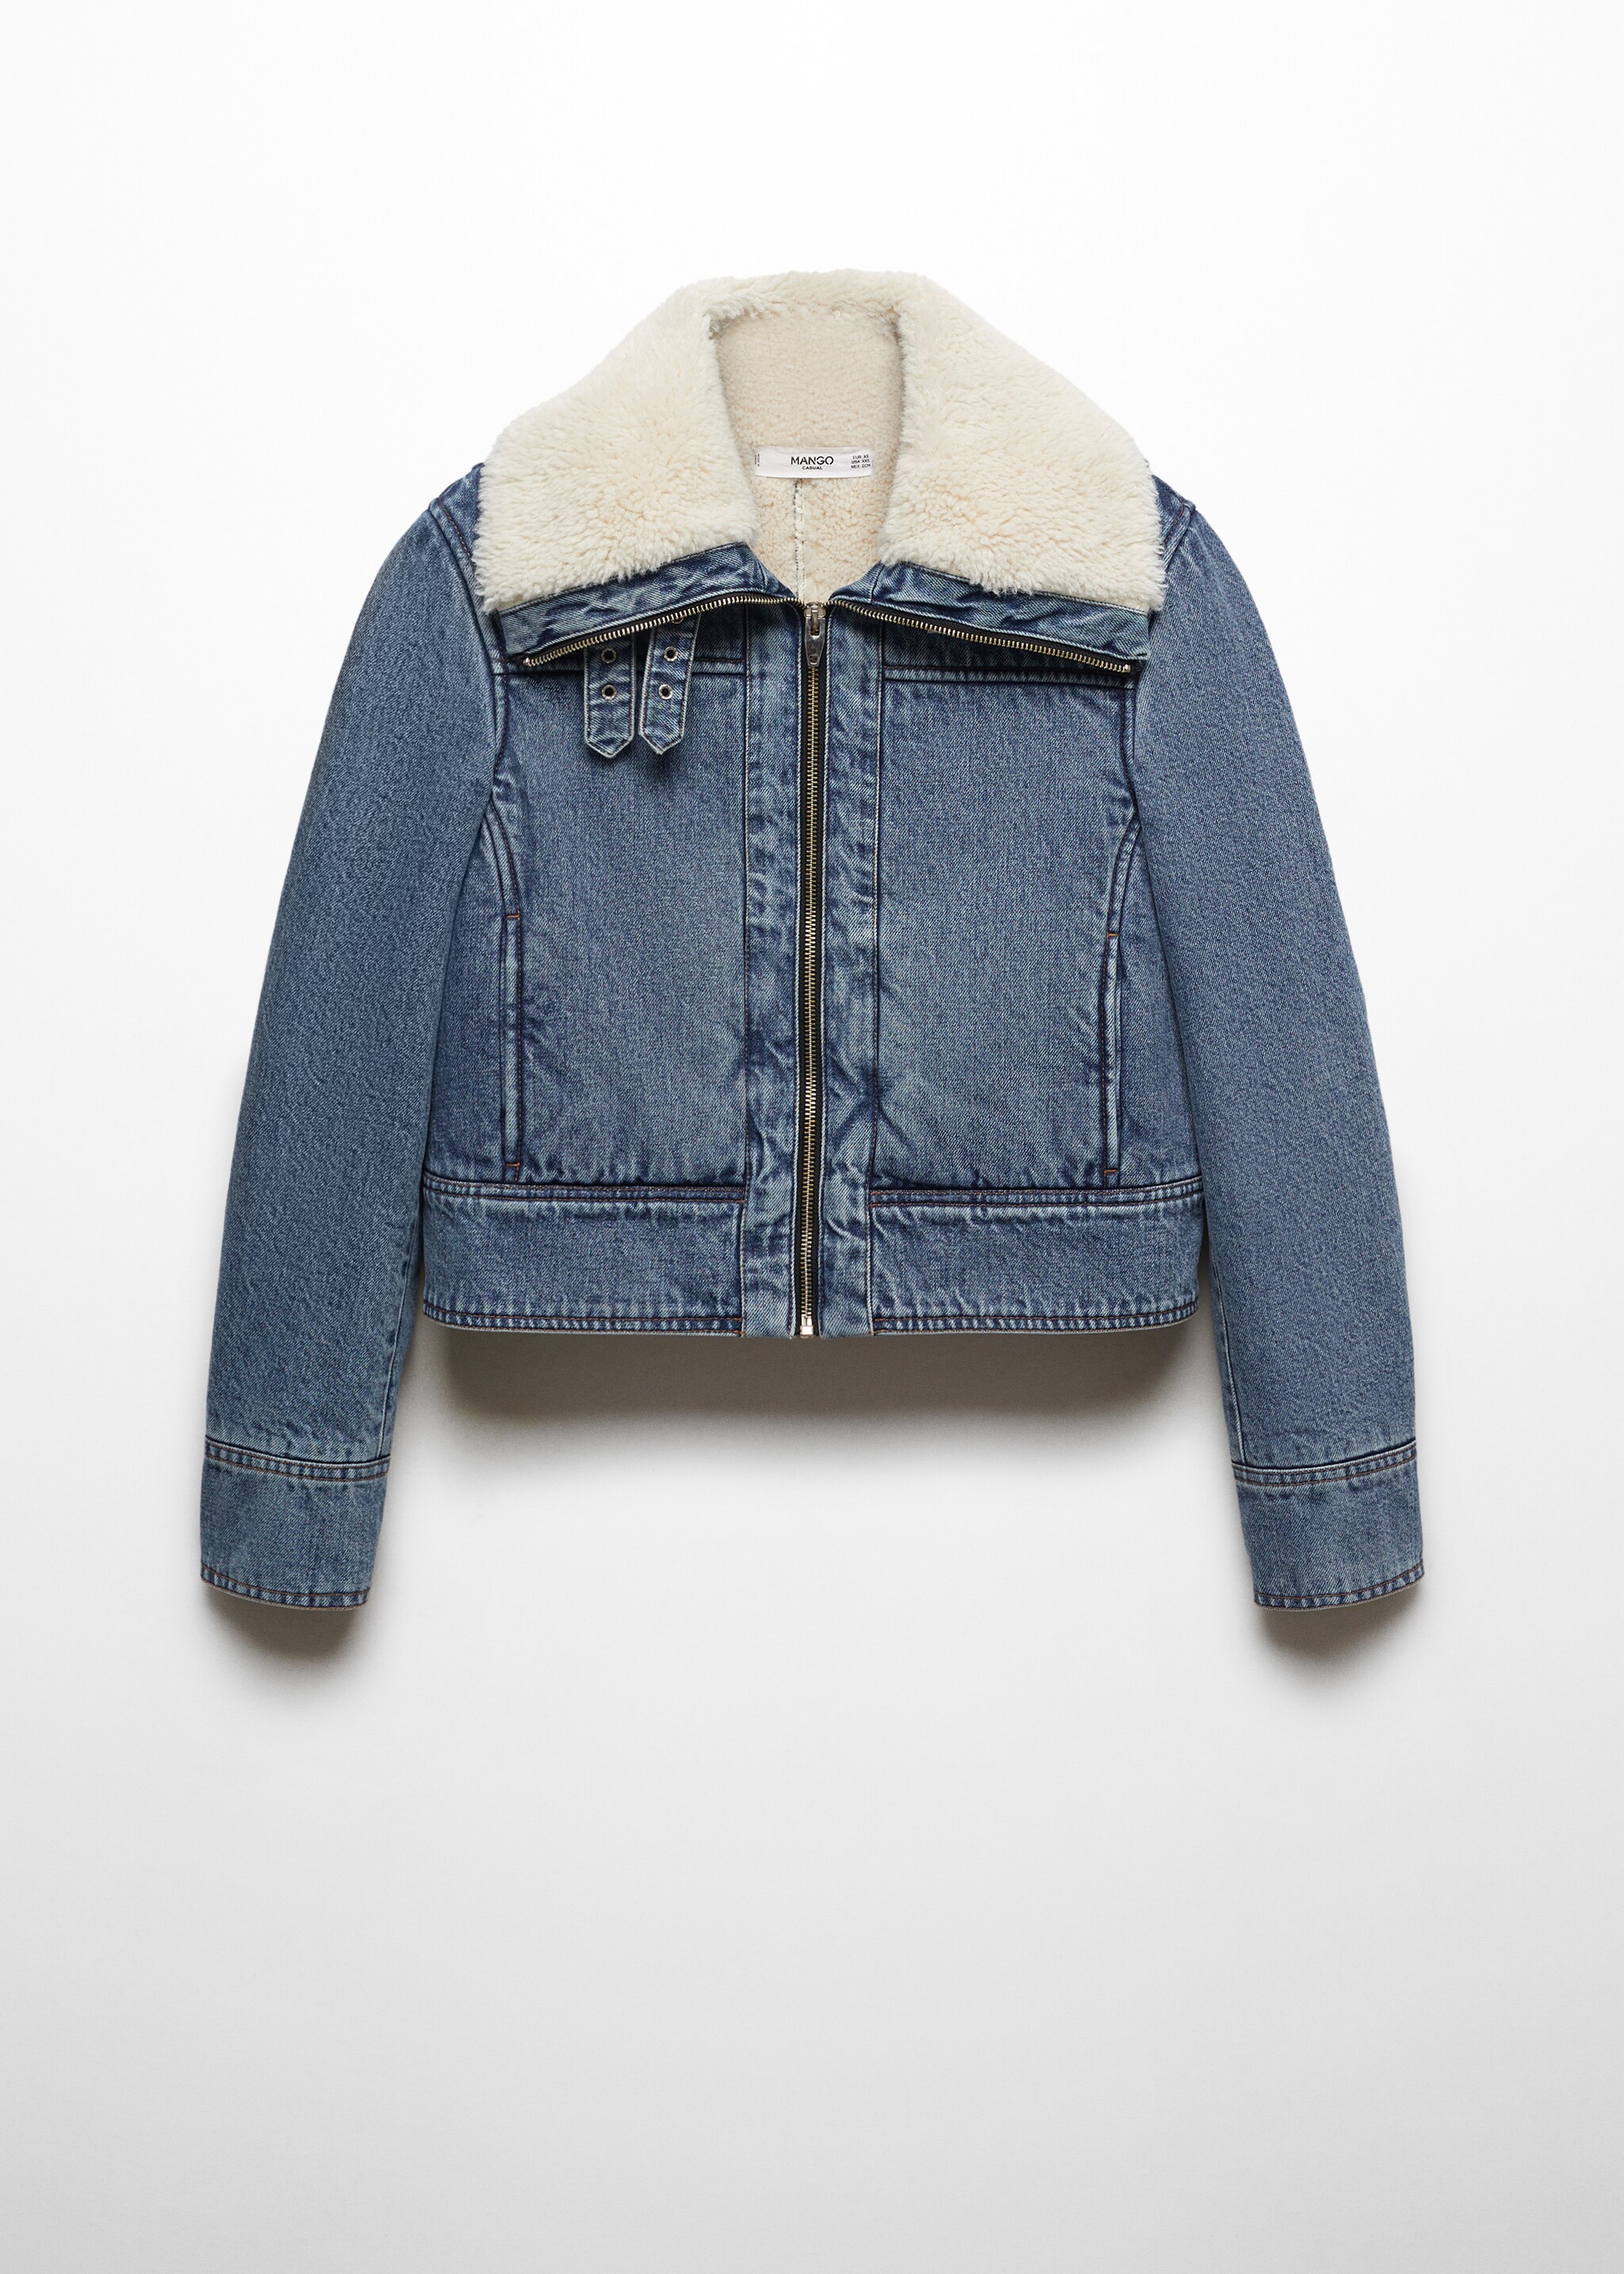 Shearling denim jacket - Article without model